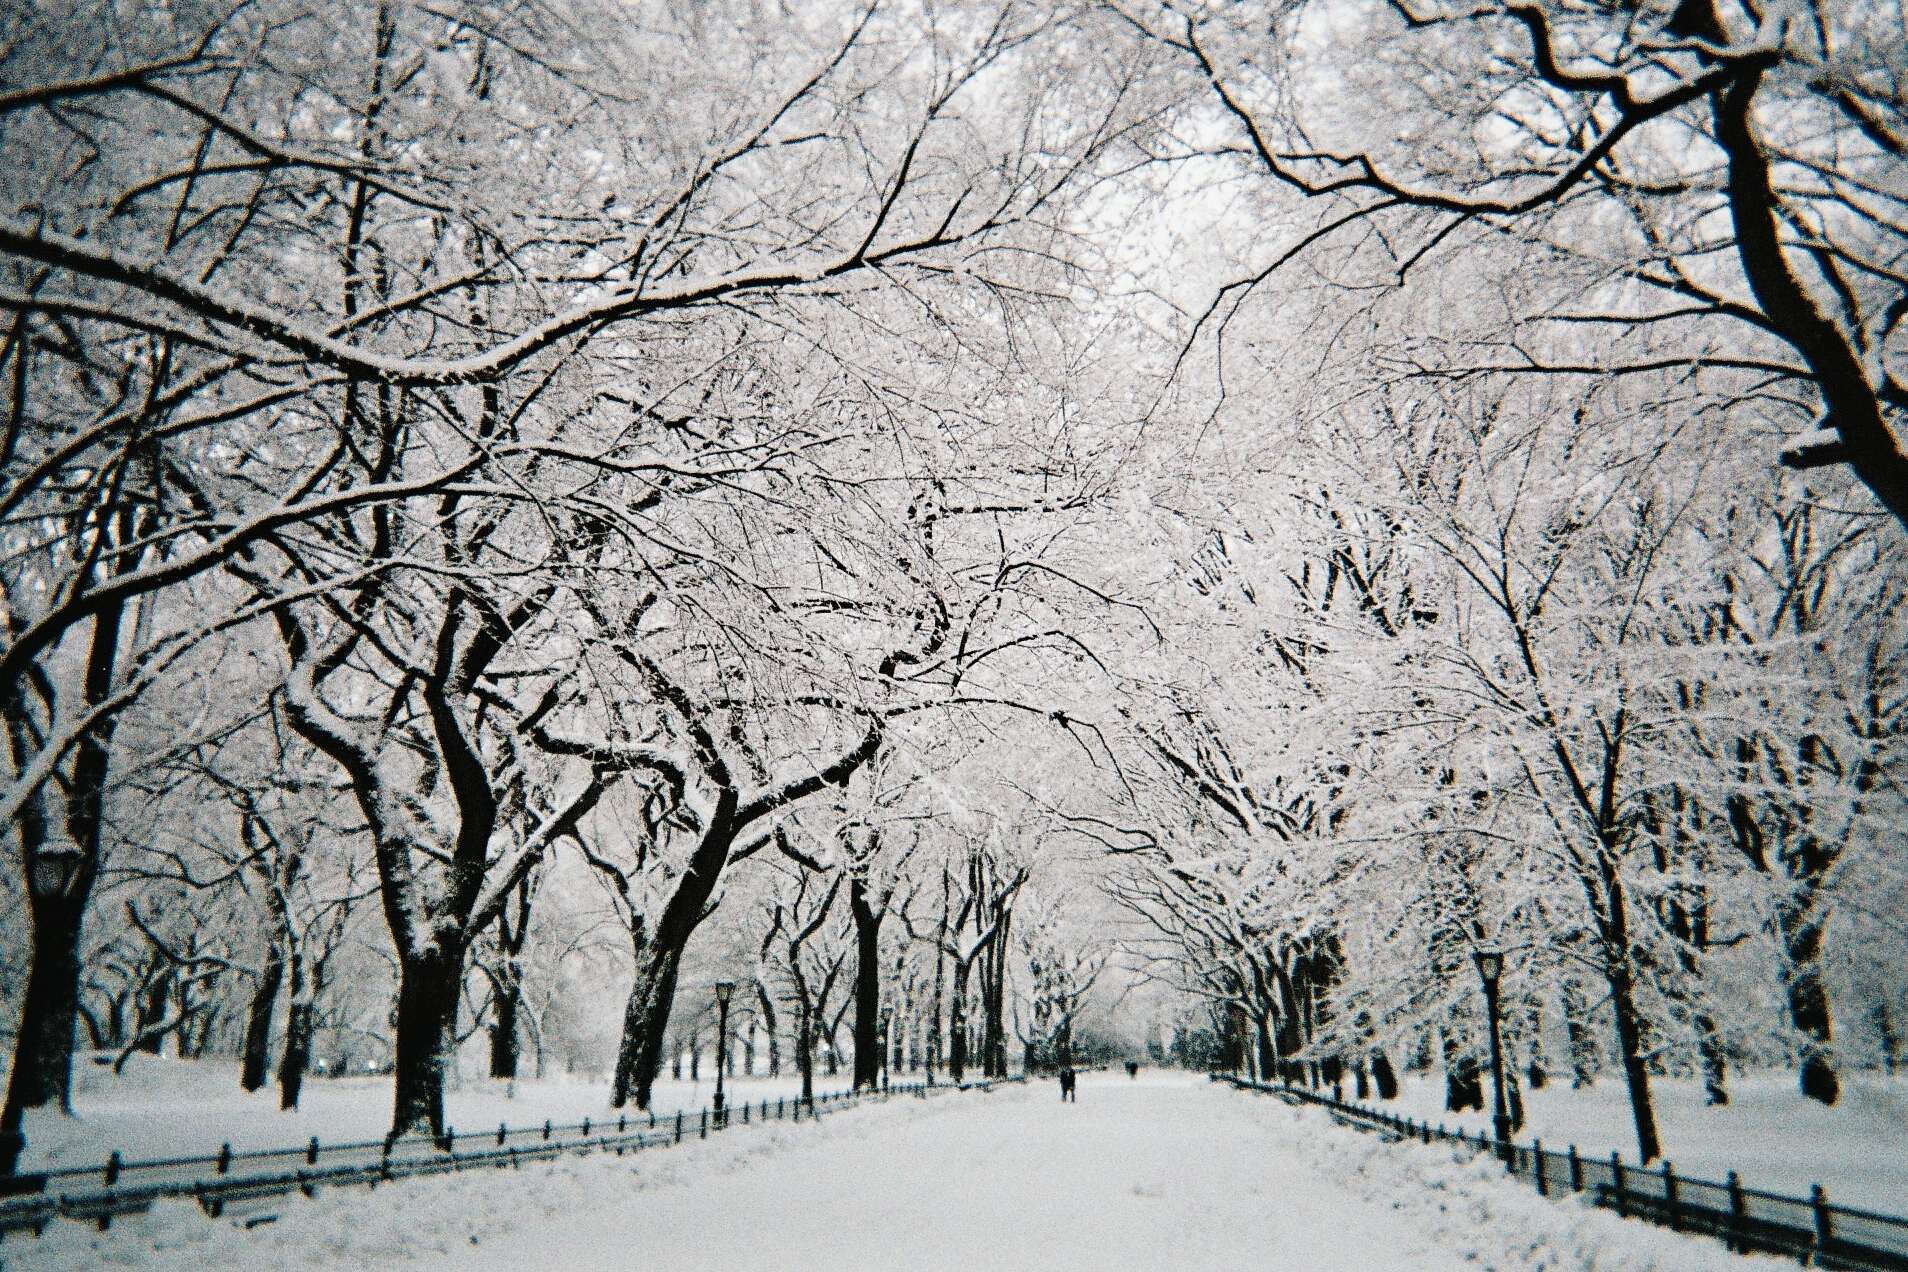 10 things I learned about winter in New York | Central park, Park ...